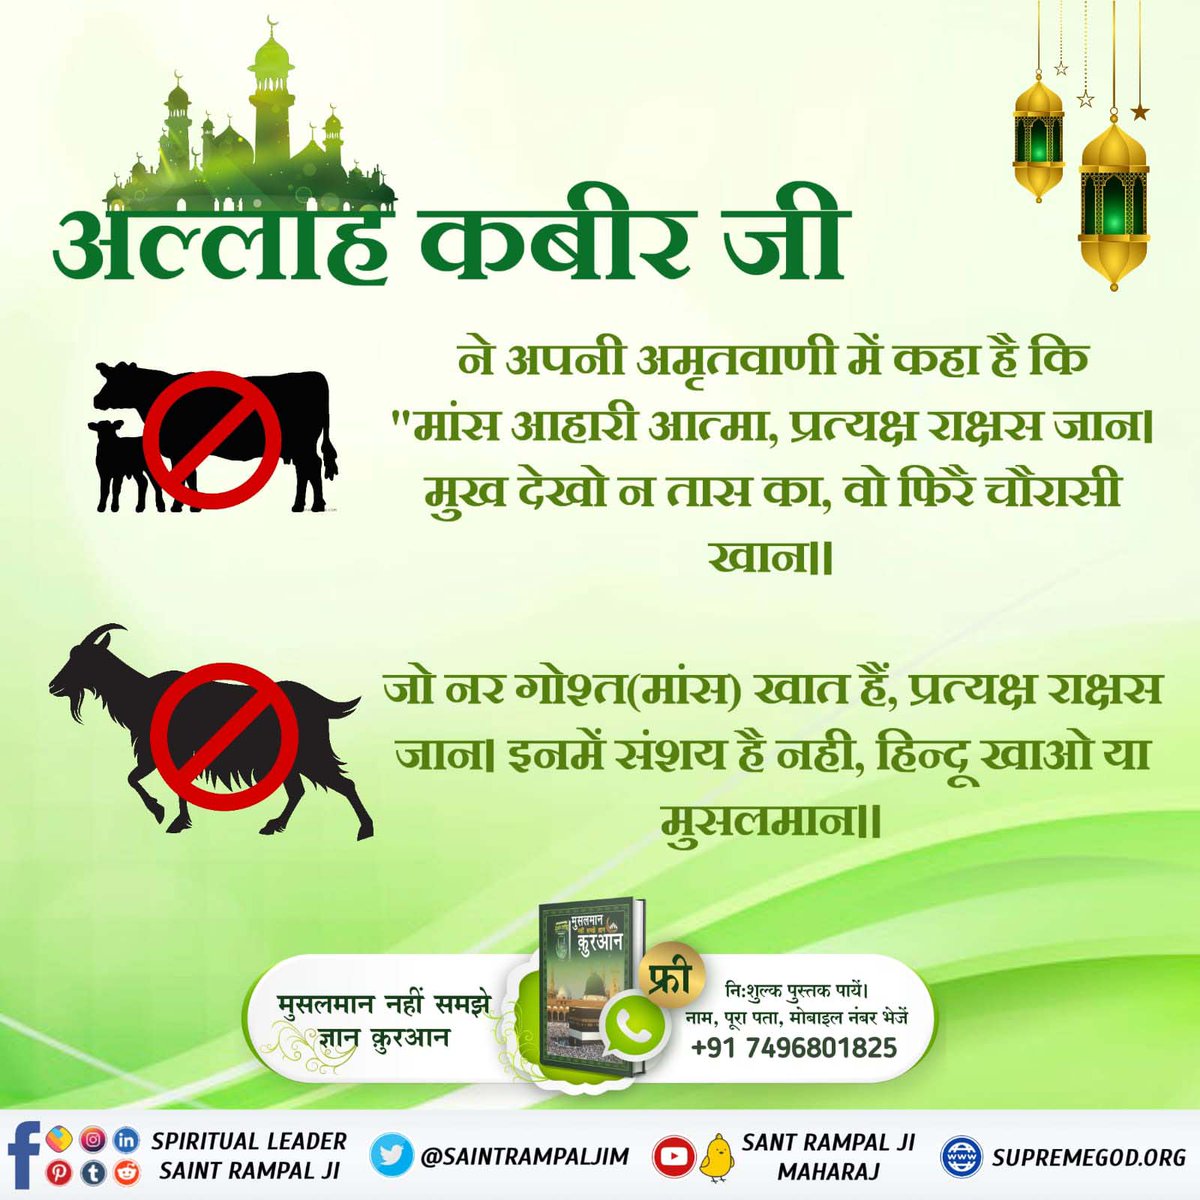 #रहम_करो_मूक_जीवों_पर

Allah Kabir Ji says that the person who commits violence against any living being is a great sinner and he can never attain salvation.

Sant RampalJi YouTube Channel